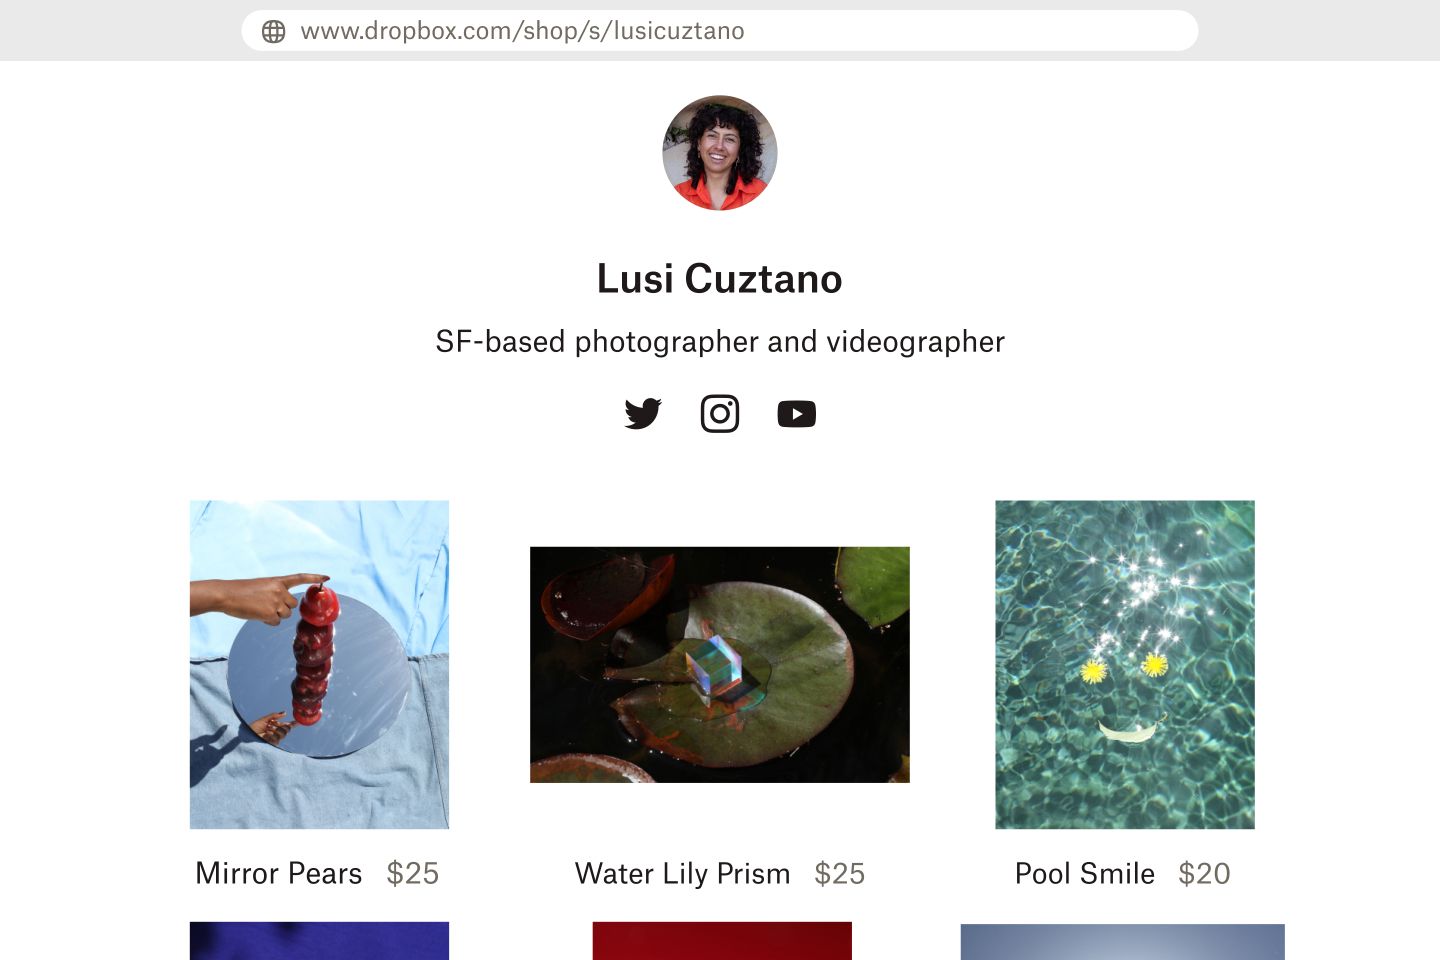 A Dropbox Shop user’s storefront includes three photos that range from $20 to $25